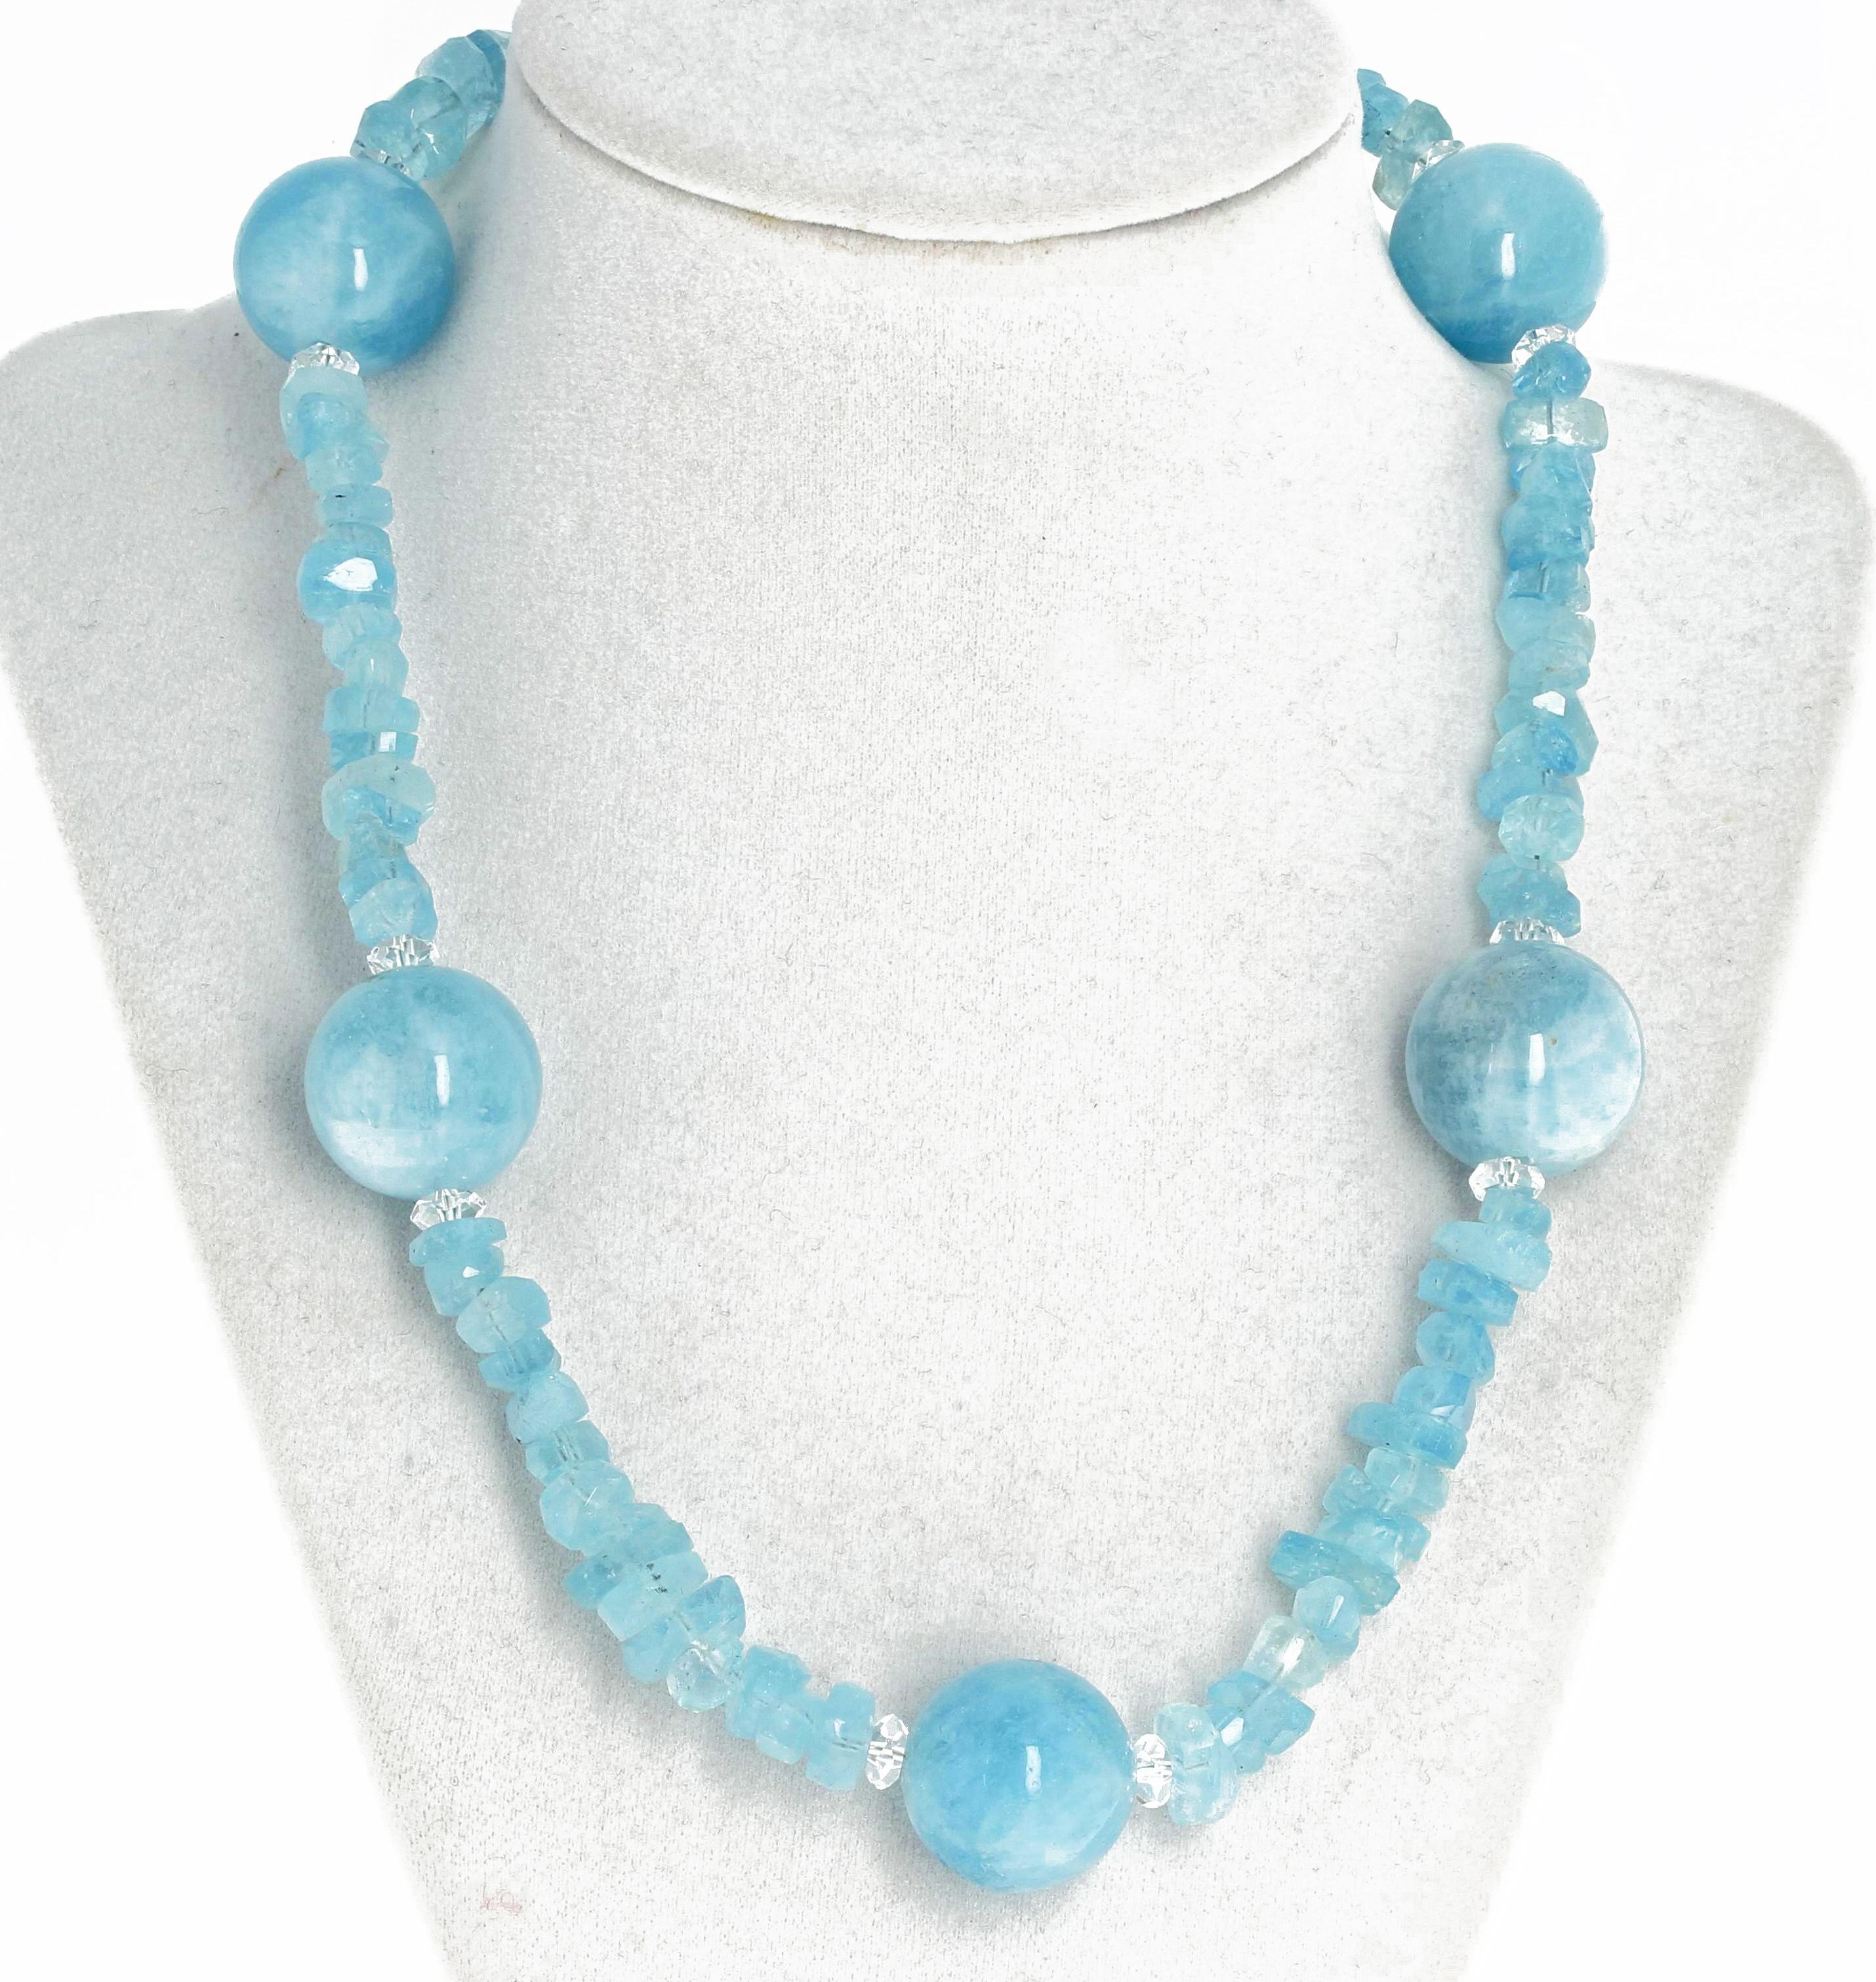 Single strand exquisite blue Aquamarine gemstone rock enhanced with Aquamarine polished rondel chips handmade necklace 19 inches long with a unique Sterling Silver clasp.  